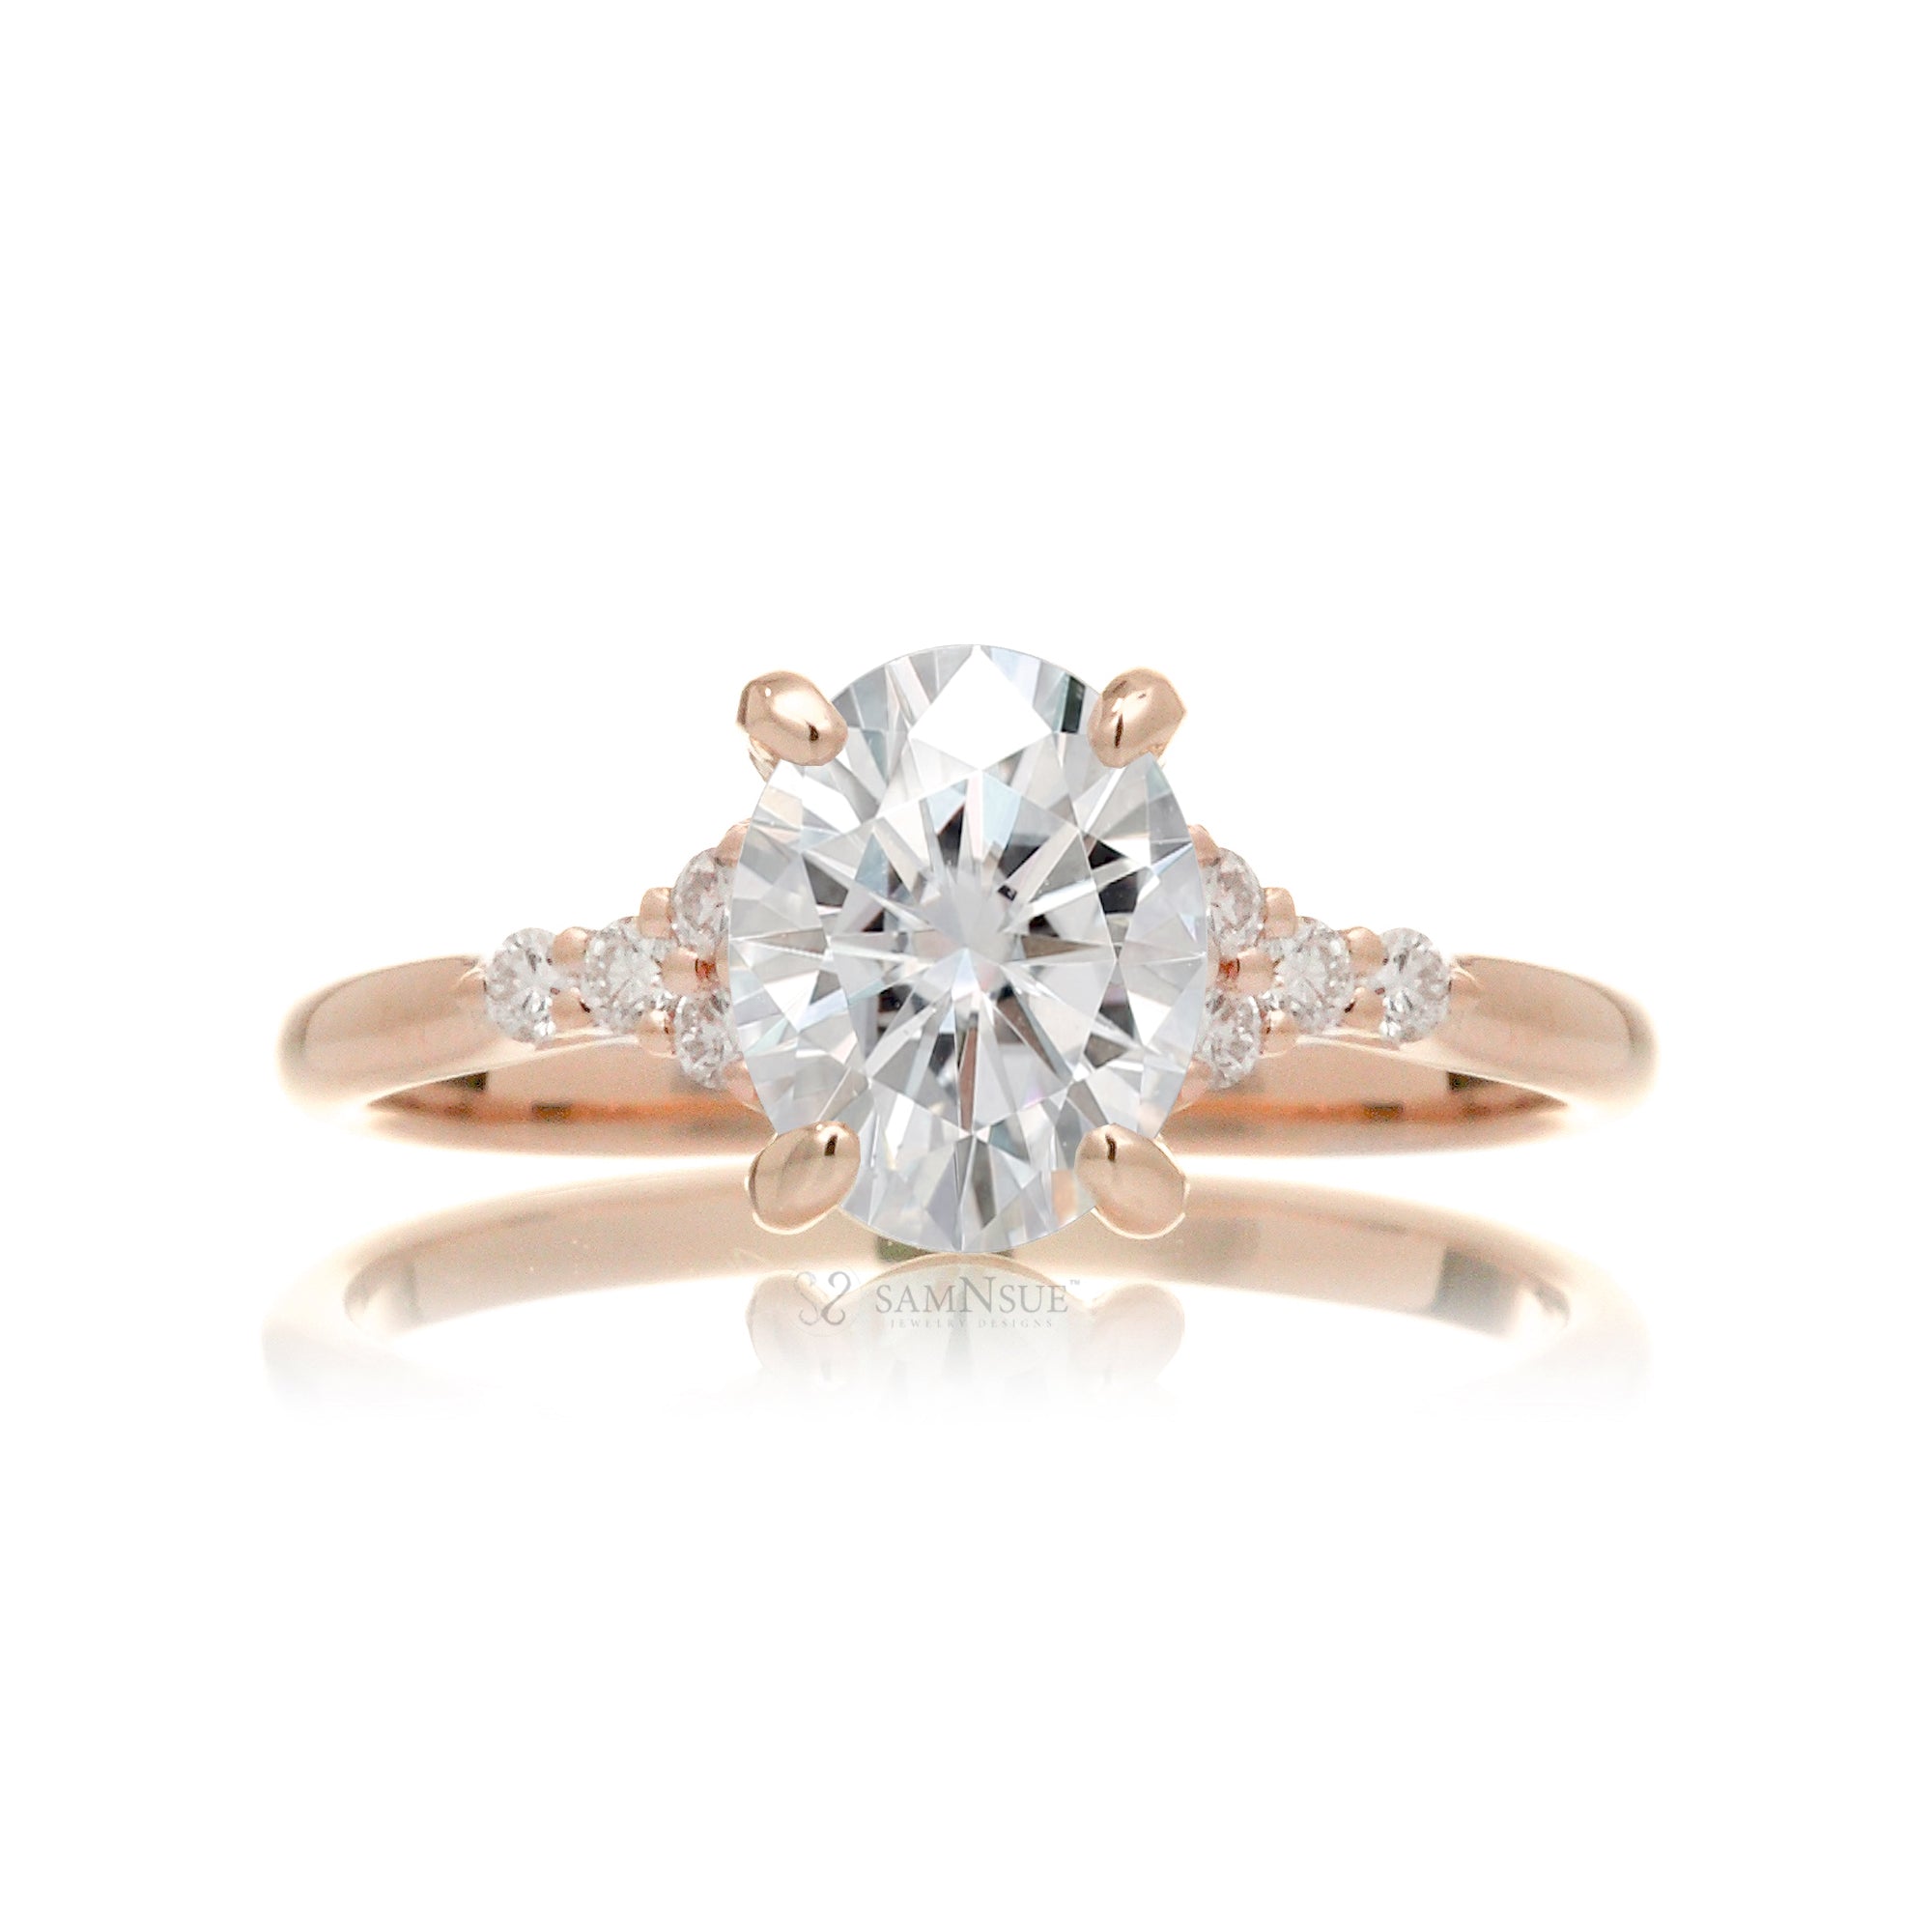 Oval moissanite ring in rose gold with side diamonds lab-grown - the Chloe ring